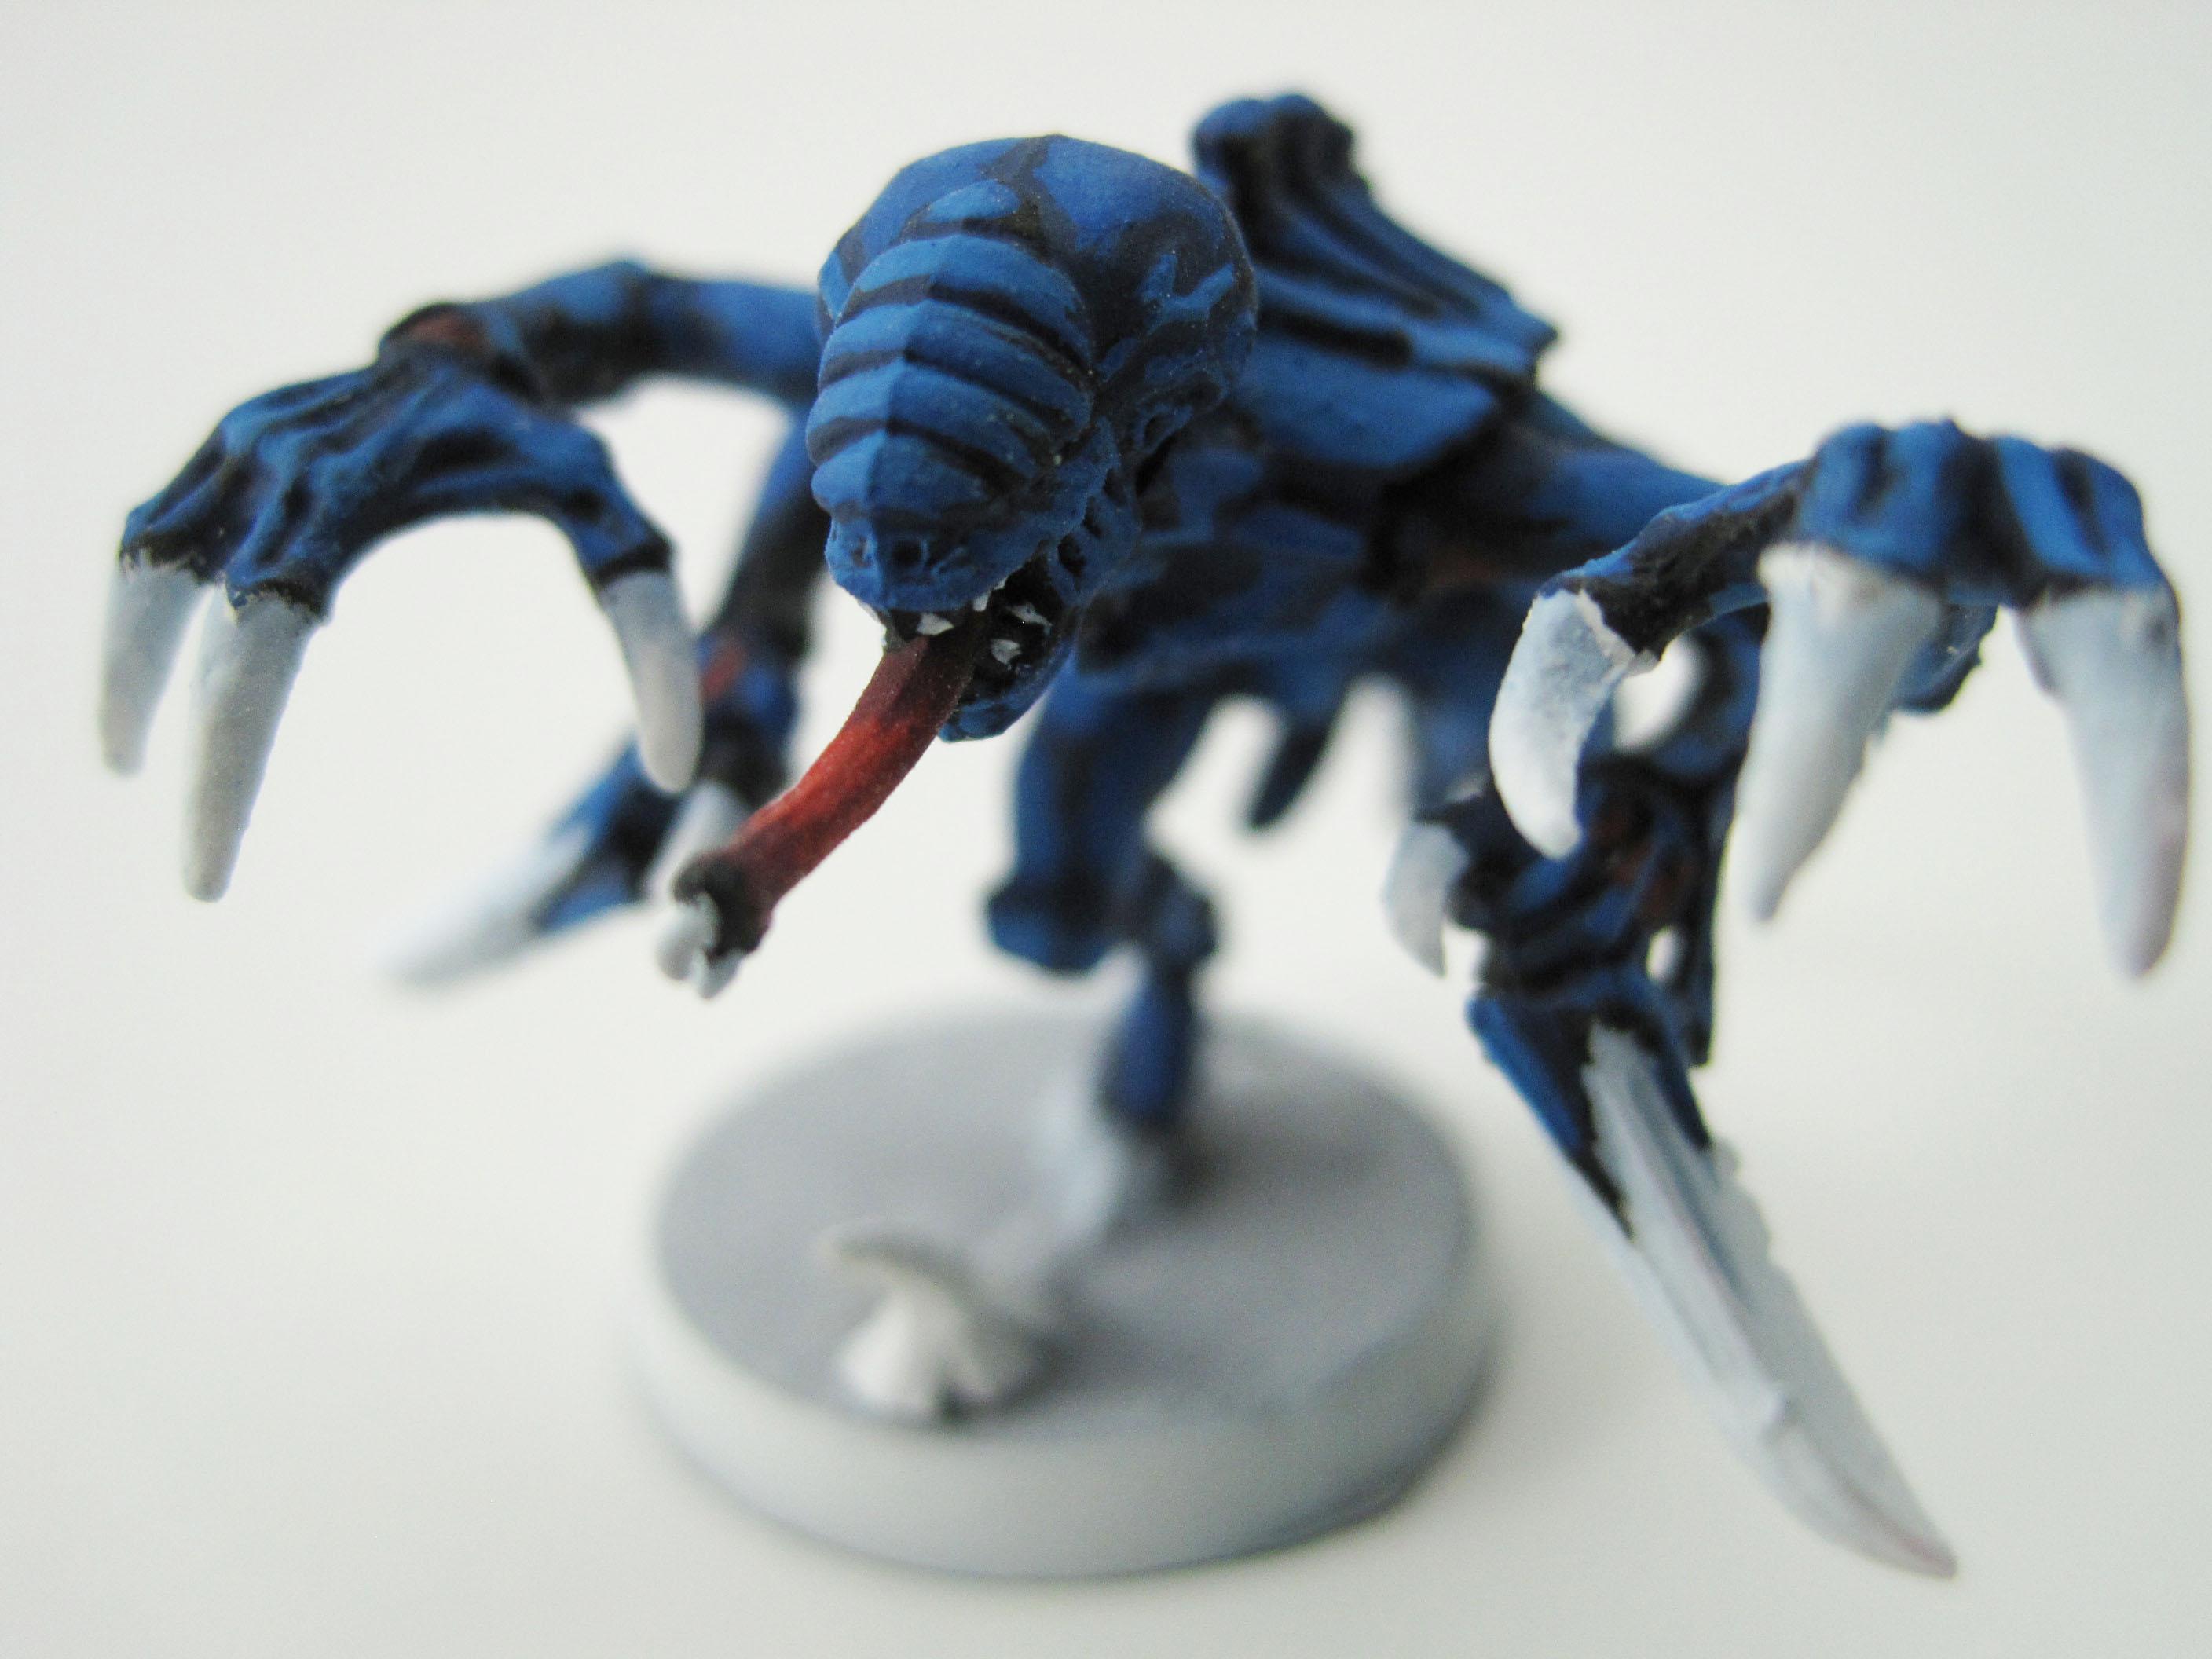 Blue, Genestealer, Implant, Implant Attack, Kyogre, Red Carapace, Red Spots, Spot, Tyranids, White Claws